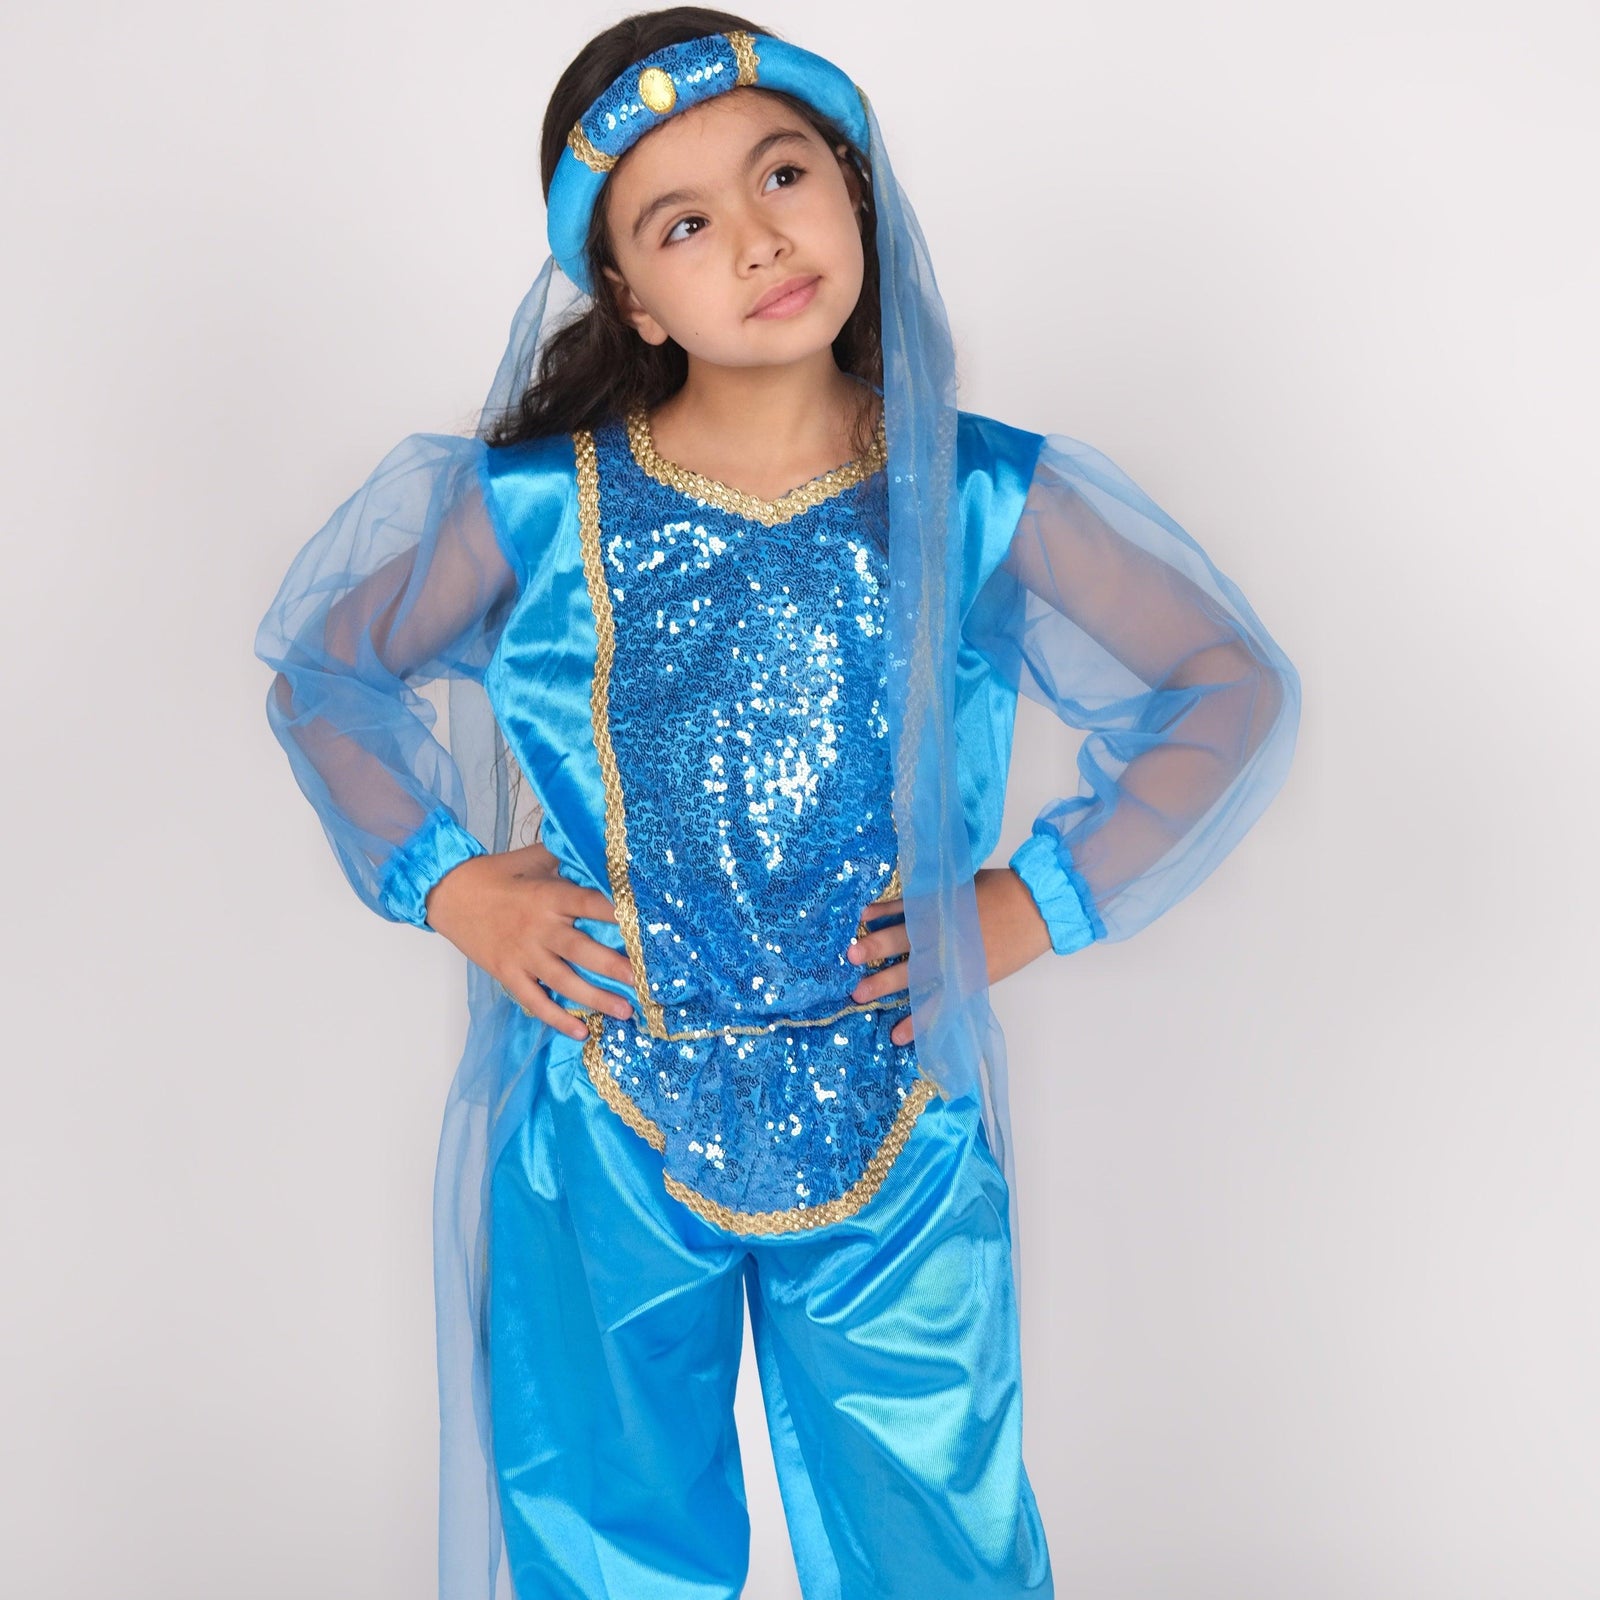 Jasmine Costume - Ourkids - The Party Animals